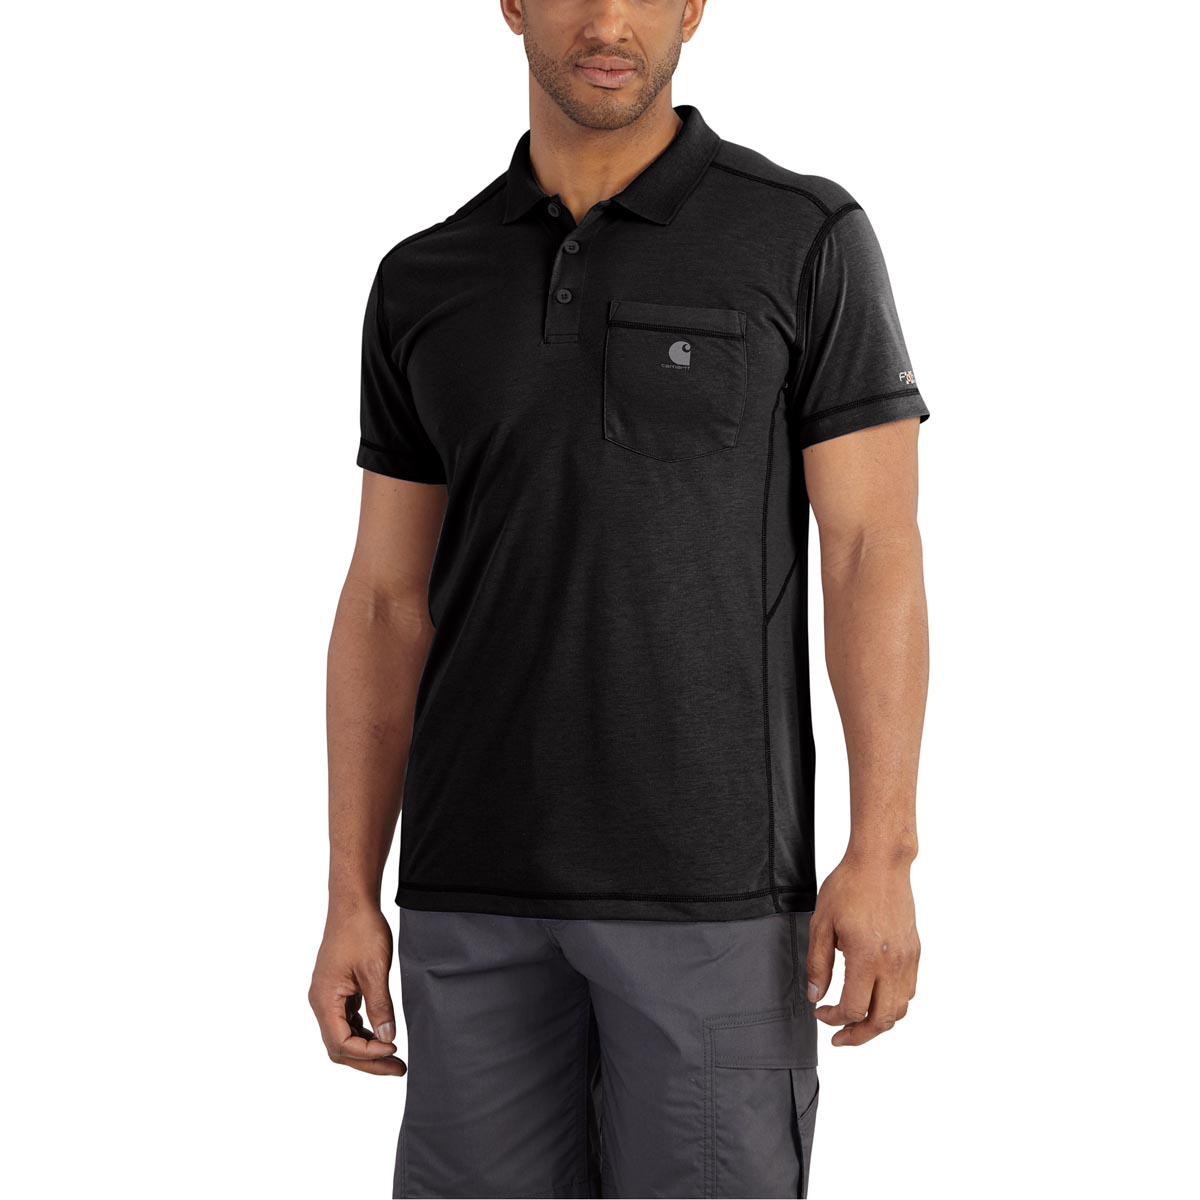 Carhartt Men's Force Extremes Pocket Polo